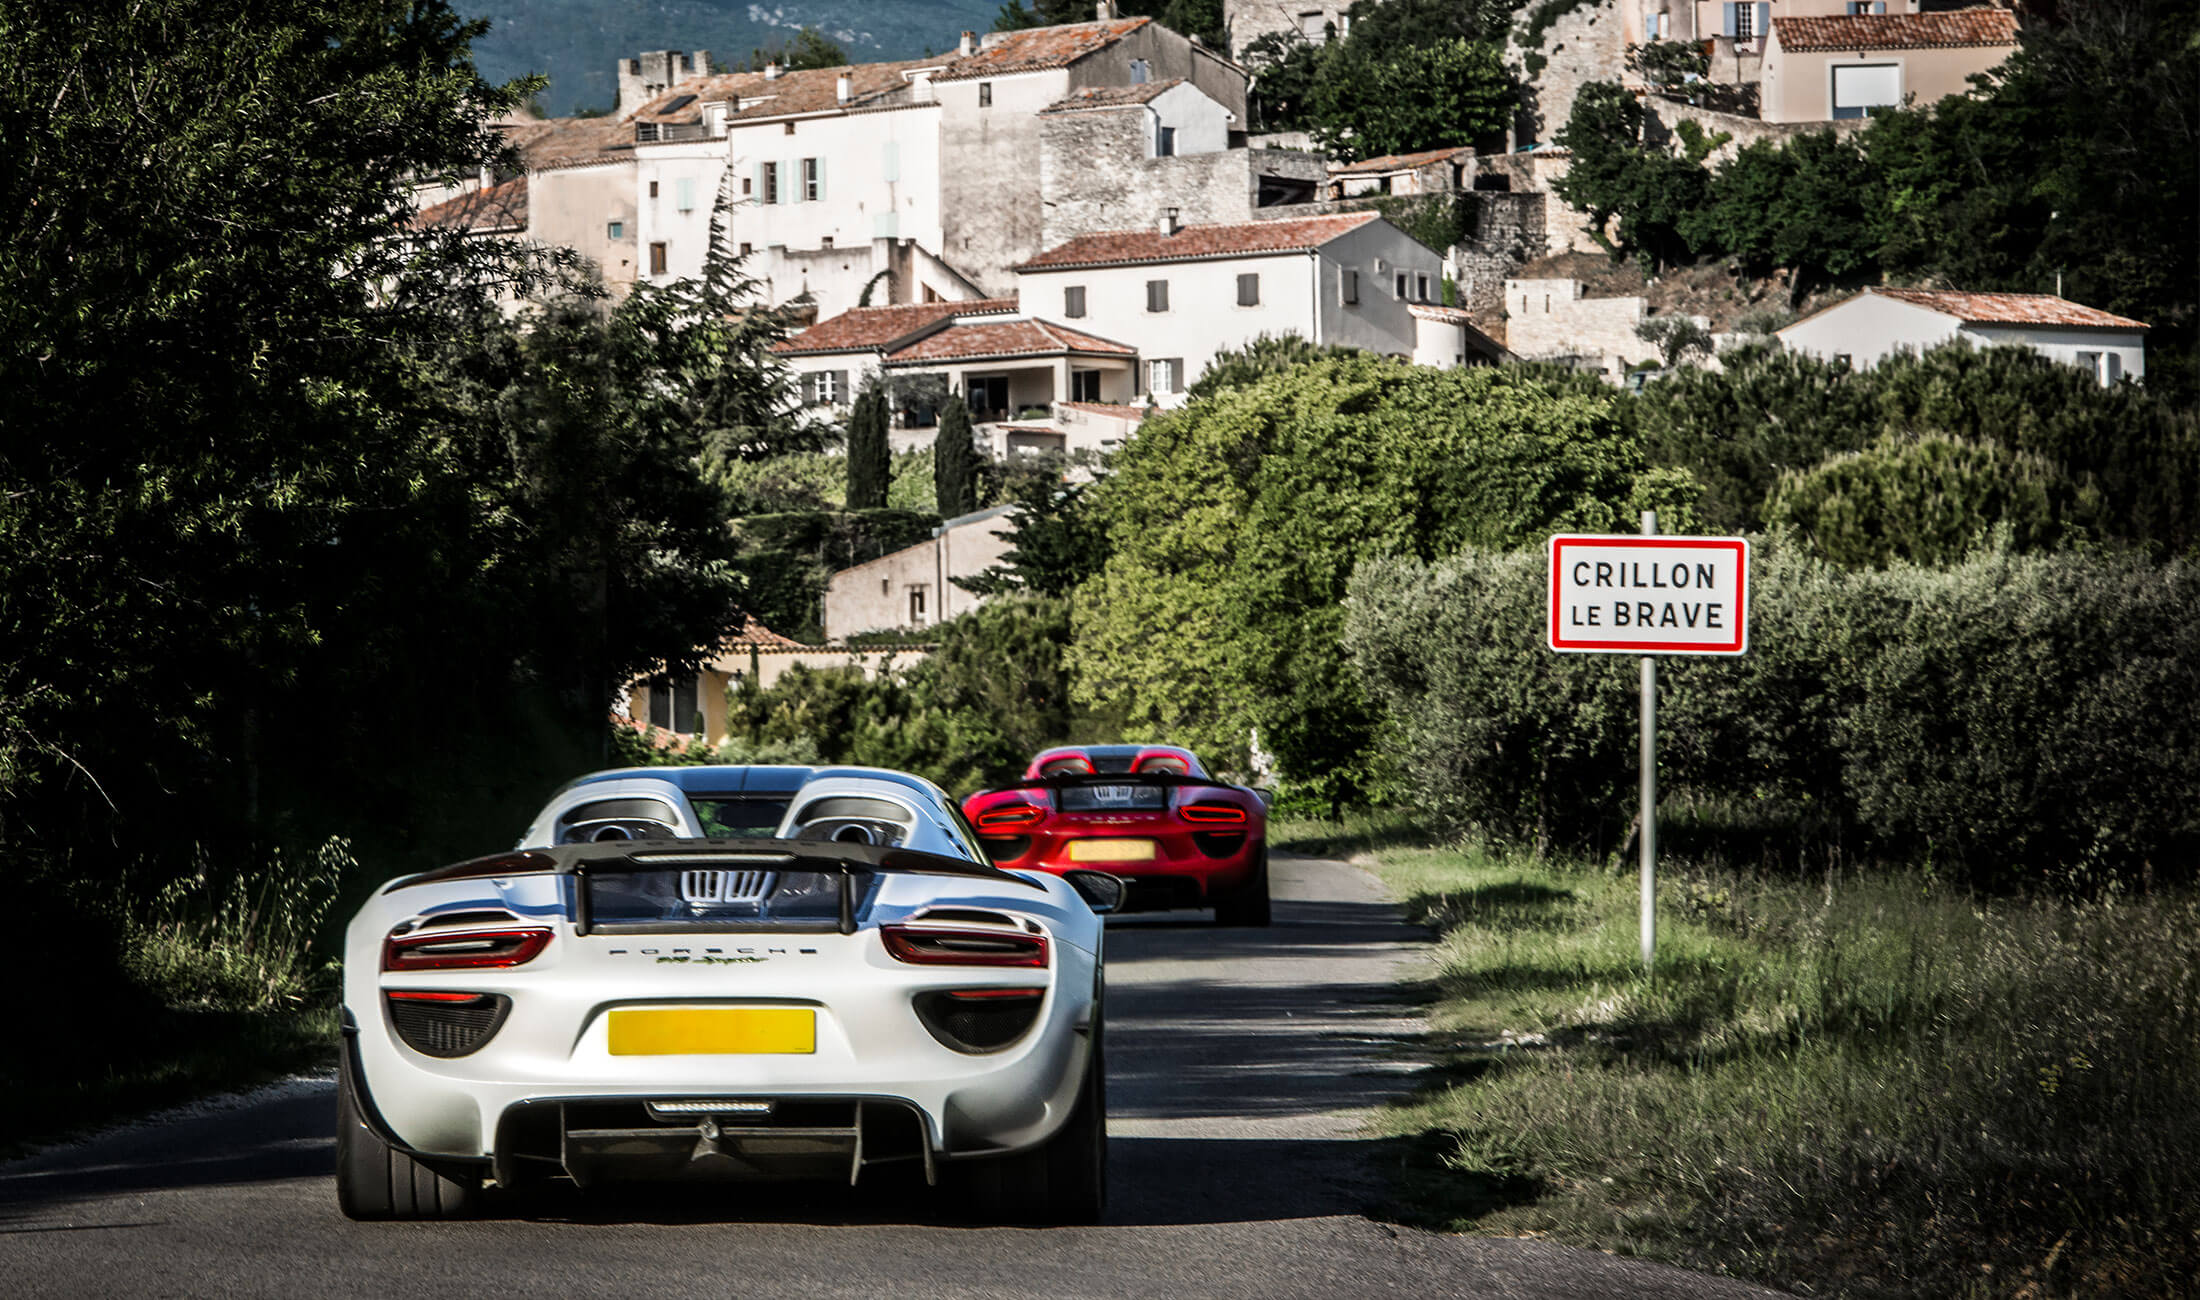 Two Porsche super cars driving into the town of Crillon Le Brave in France